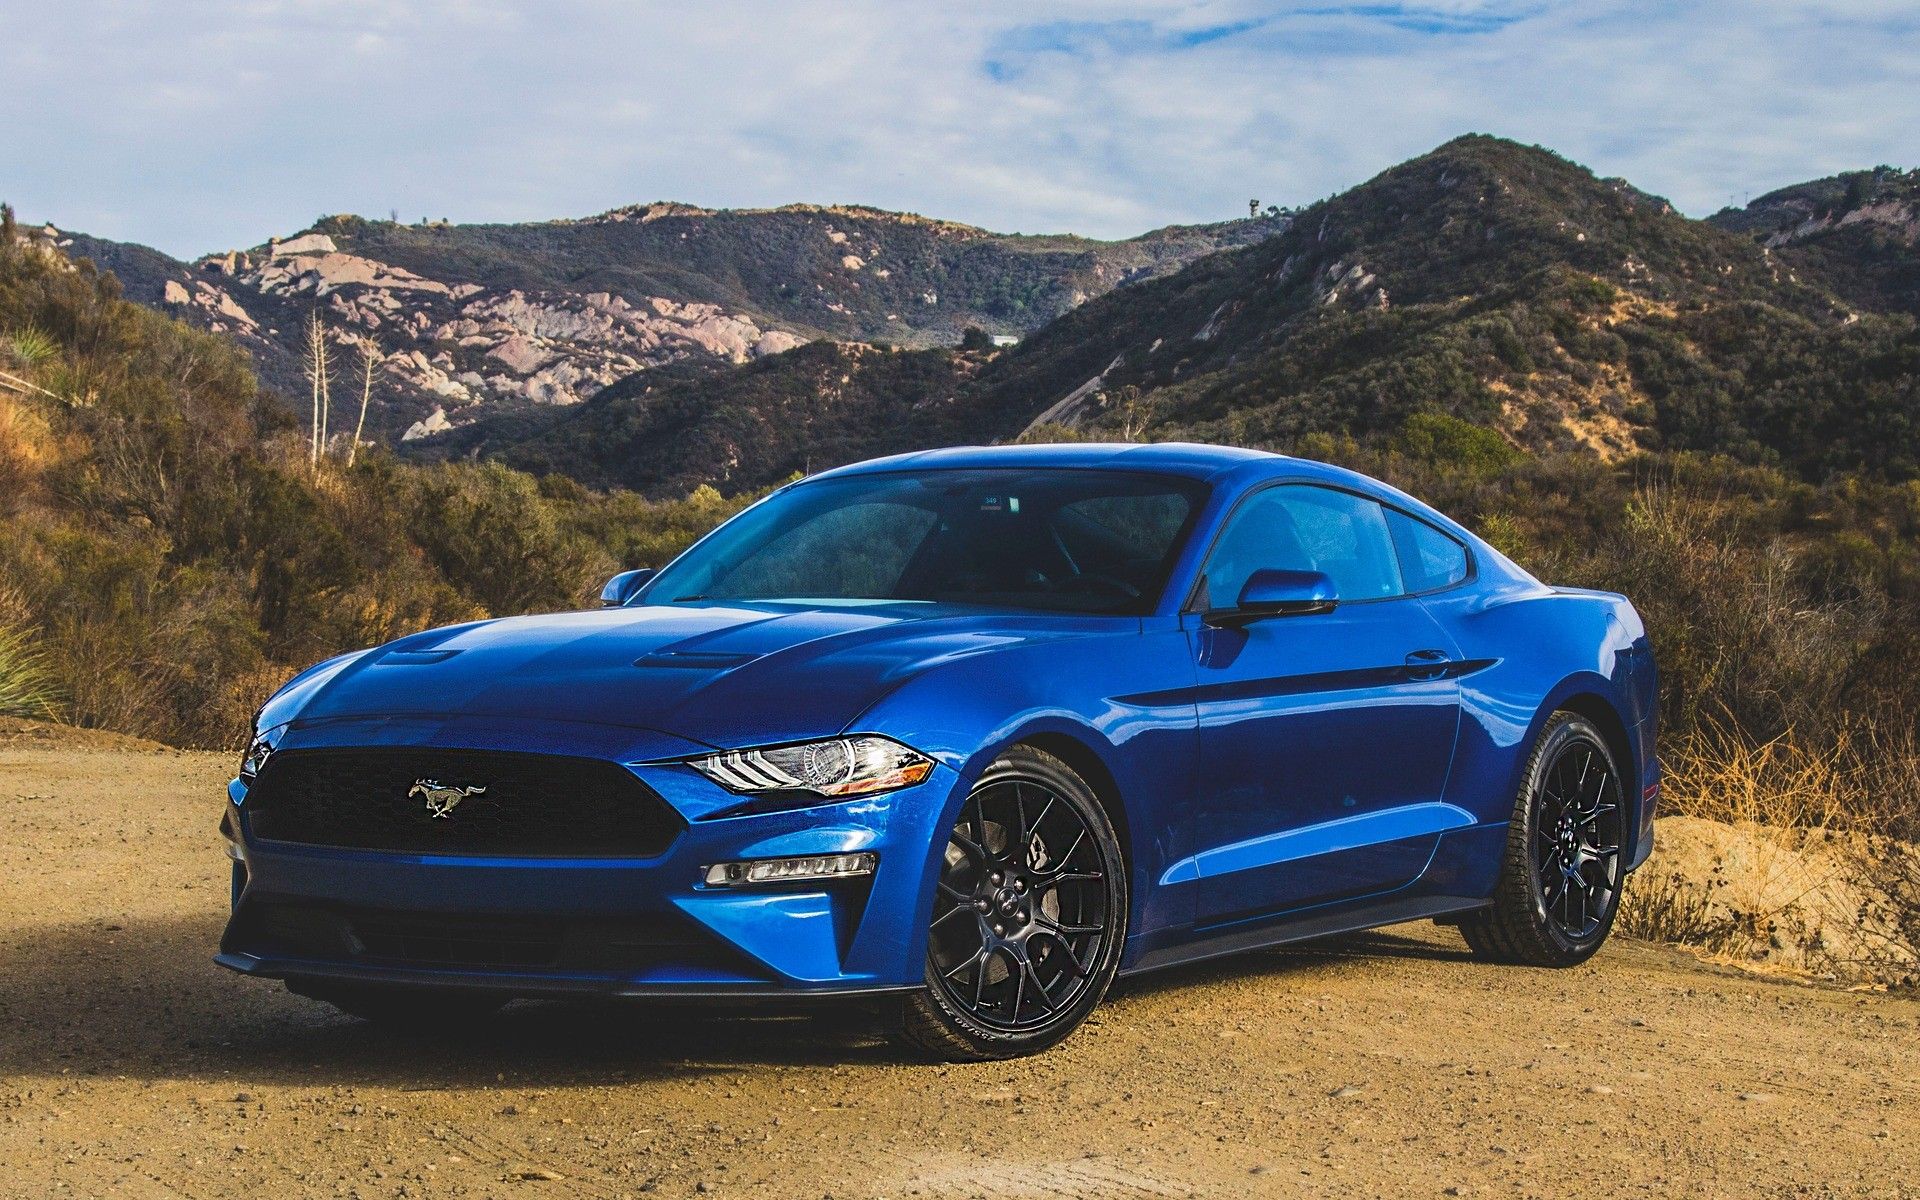 2018 Ford Mustang GT Premium Fastback 0-60 Times, Top Speed, Specs